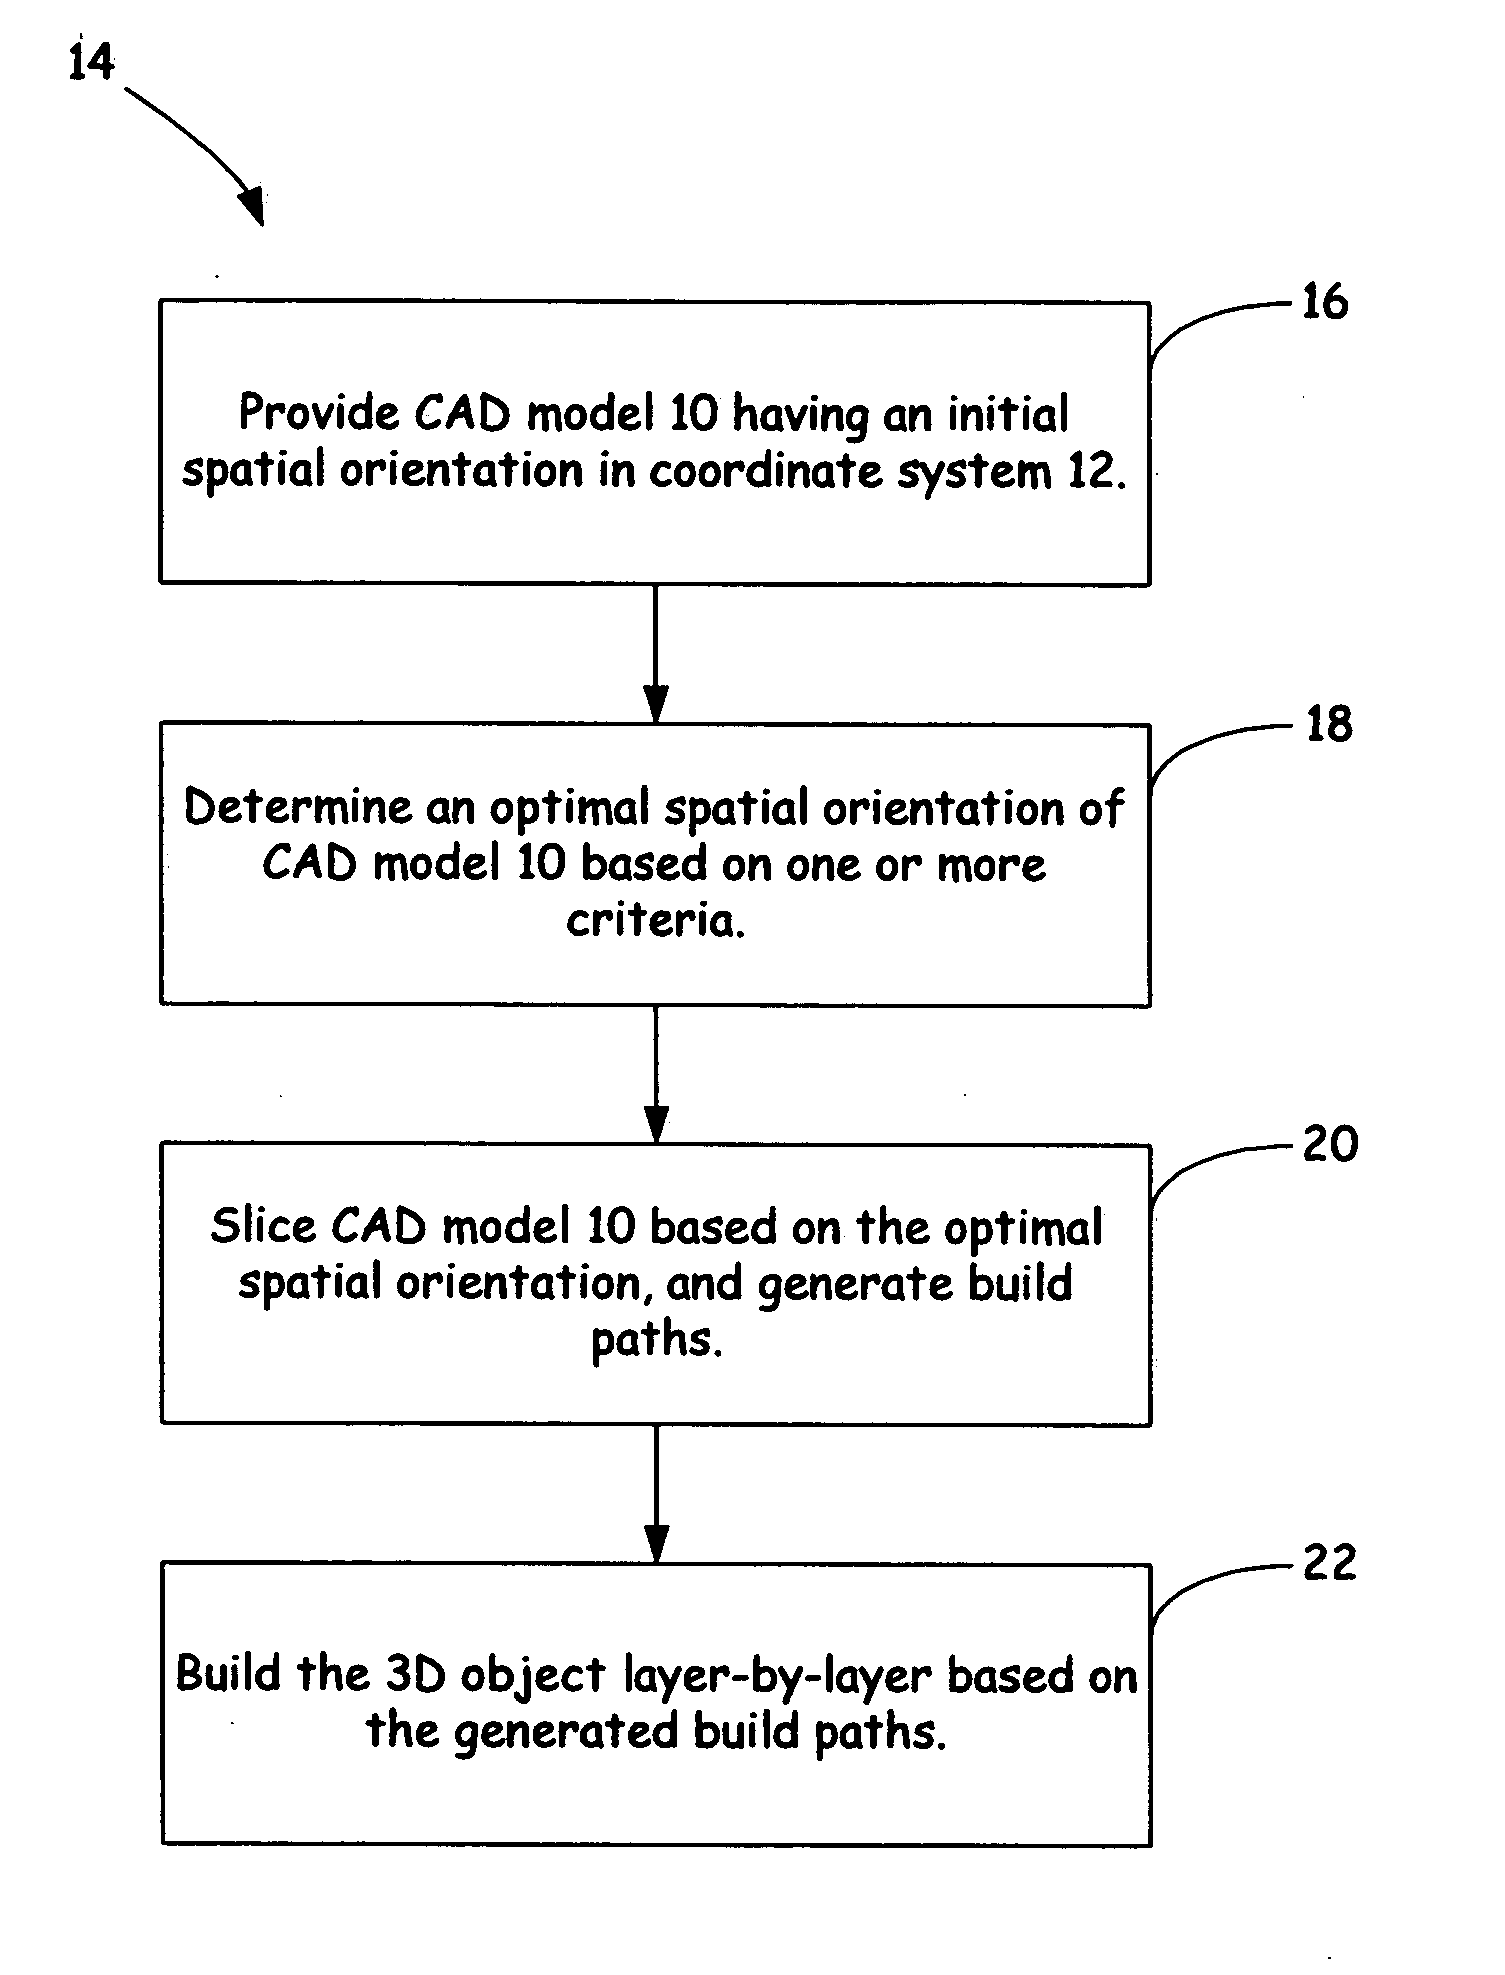 Method for optimizing spatial orientations of computer-aided design models